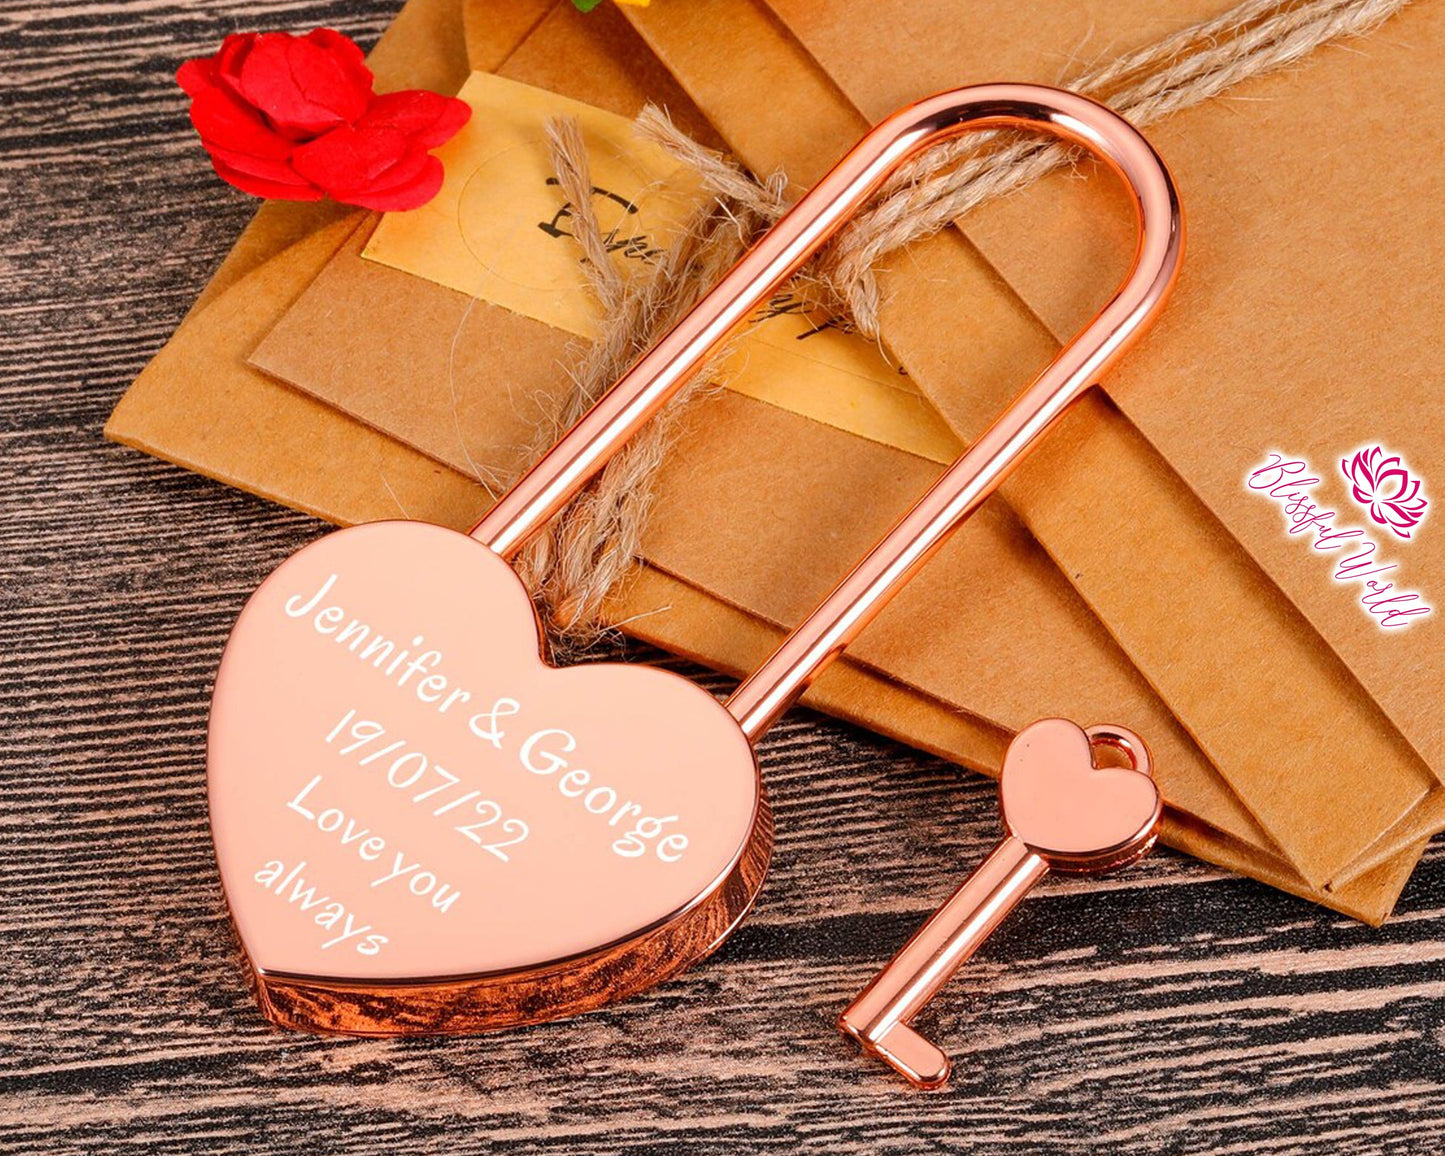 Customized Heart Padlock, Personalized Engraved Padlock, Love Lock, Engraved Lock, Padlock with Key, Engagement Gift, Anniversary Gift.